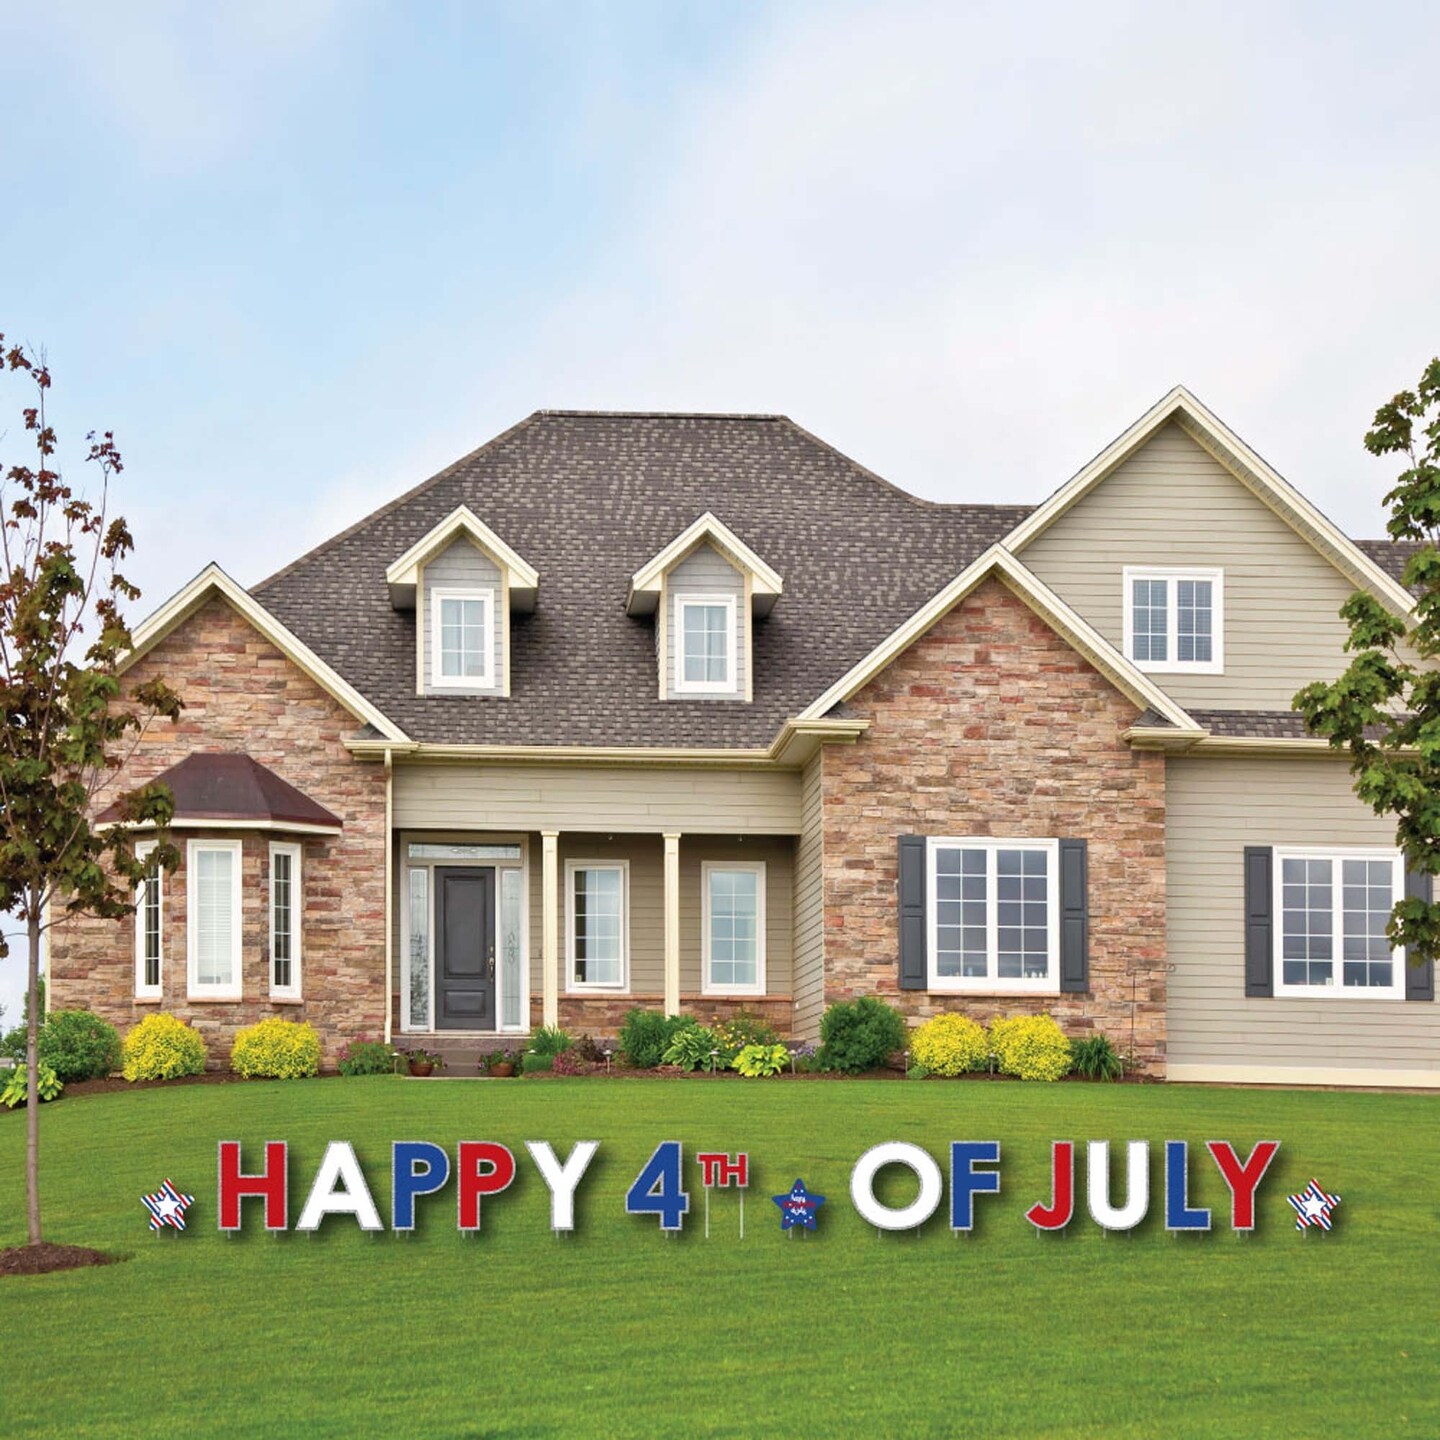 Big Dot of Happiness 4th of July - Yard Sign Outdoor Lawn Decorations - Independence Day Party Yard Signs - Happy 4th of July